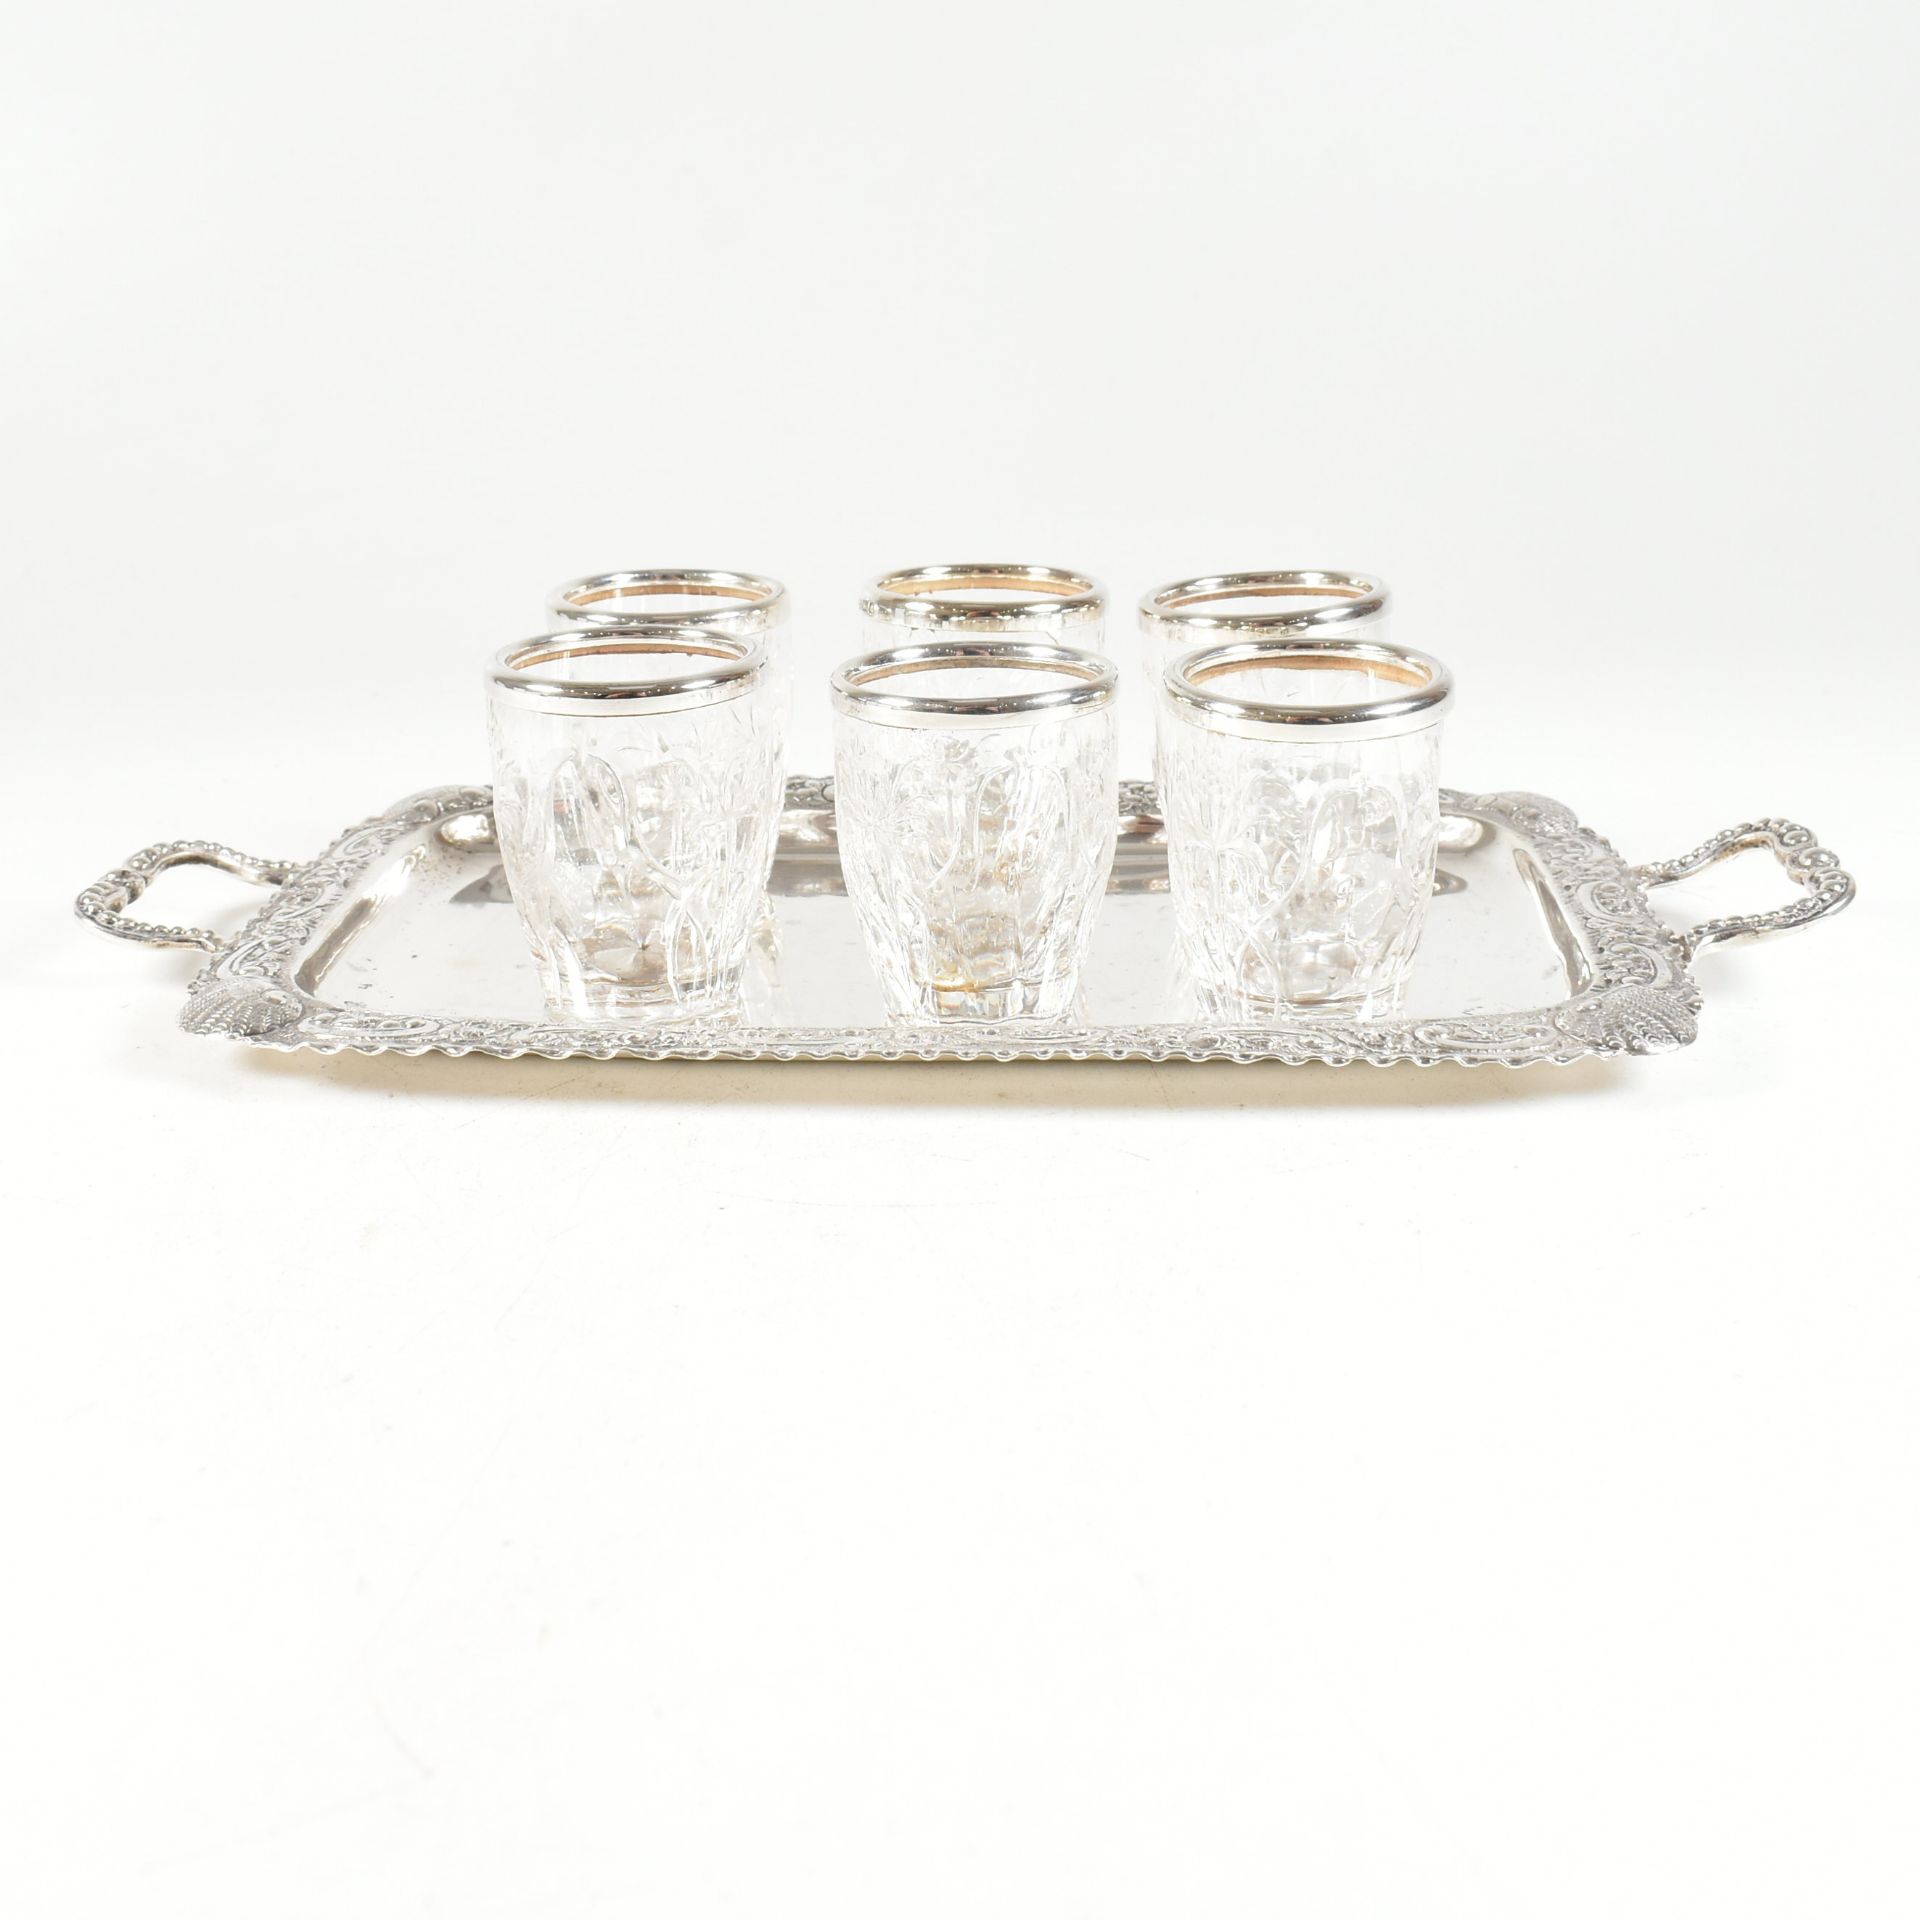 EDWARDIAN CASED SILVER MOUNTED TOT GLASS & TRAY SET - Image 9 of 15